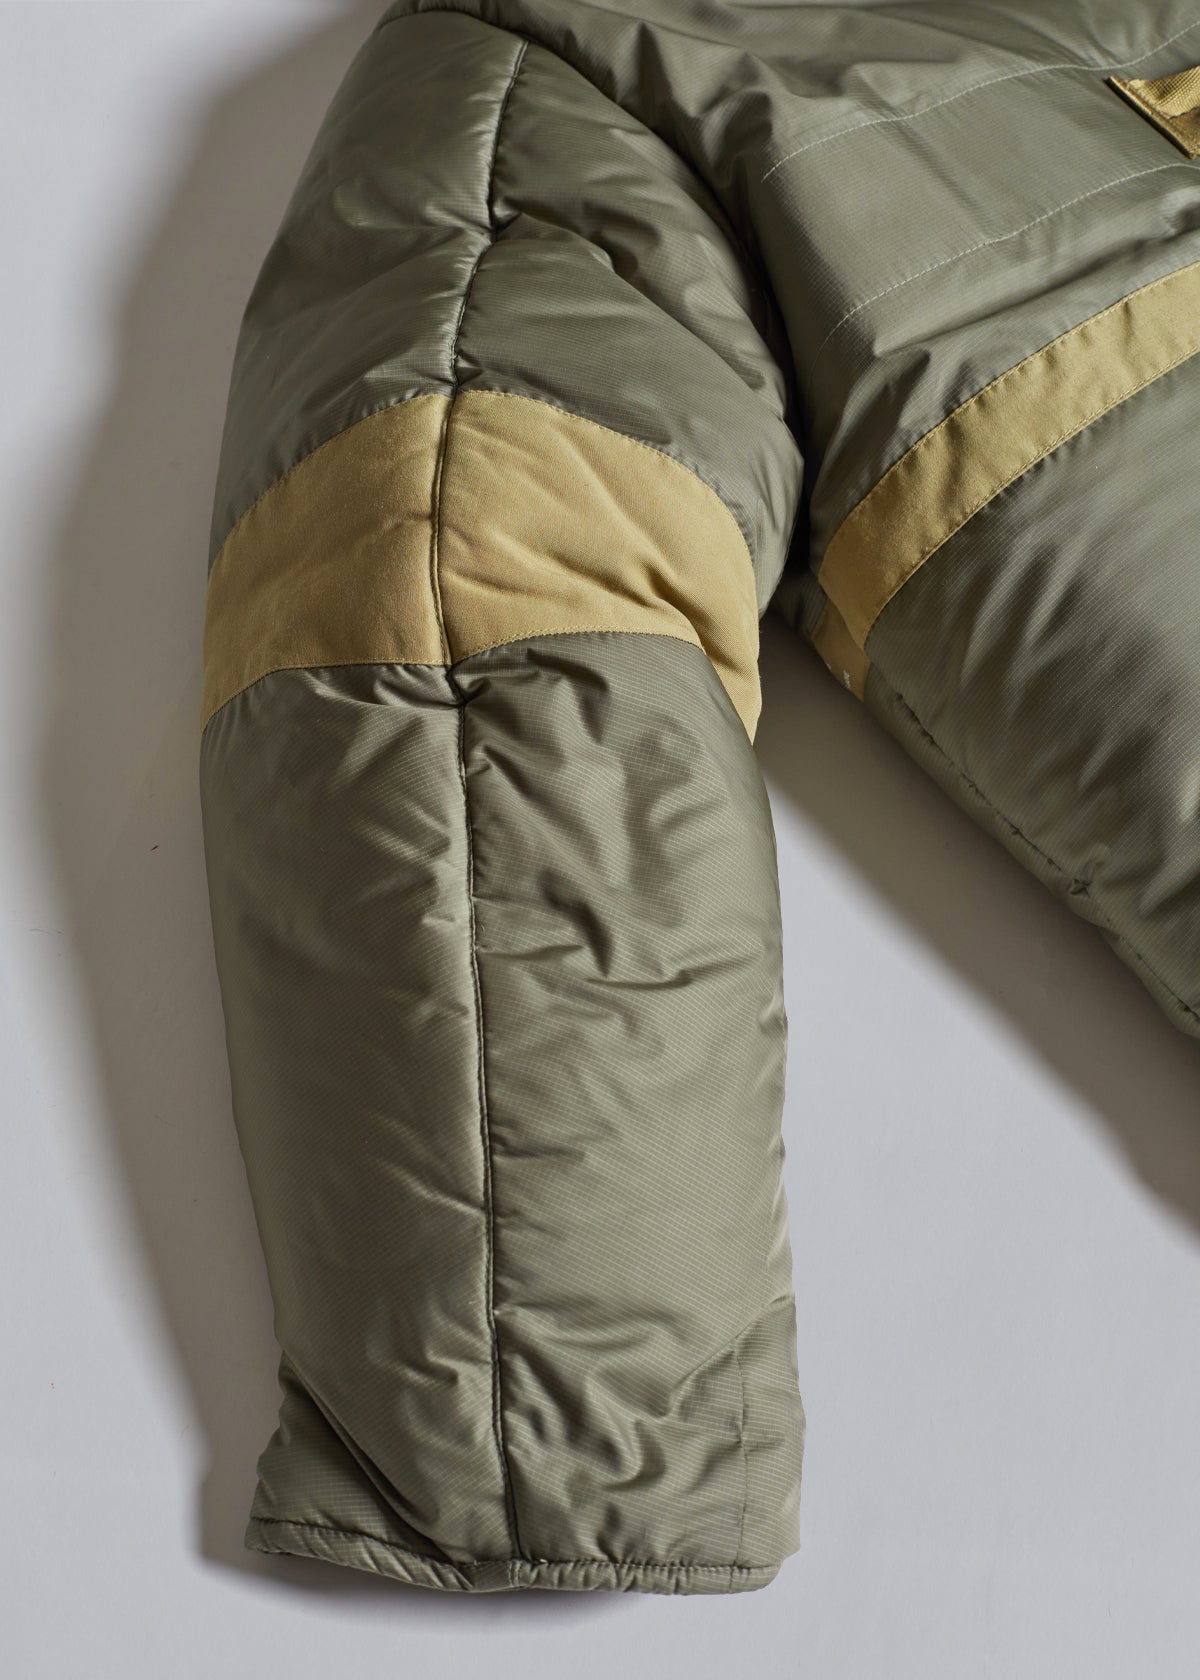 Buds Life Down Jacket AW2001 - Medium - The Archivist Store